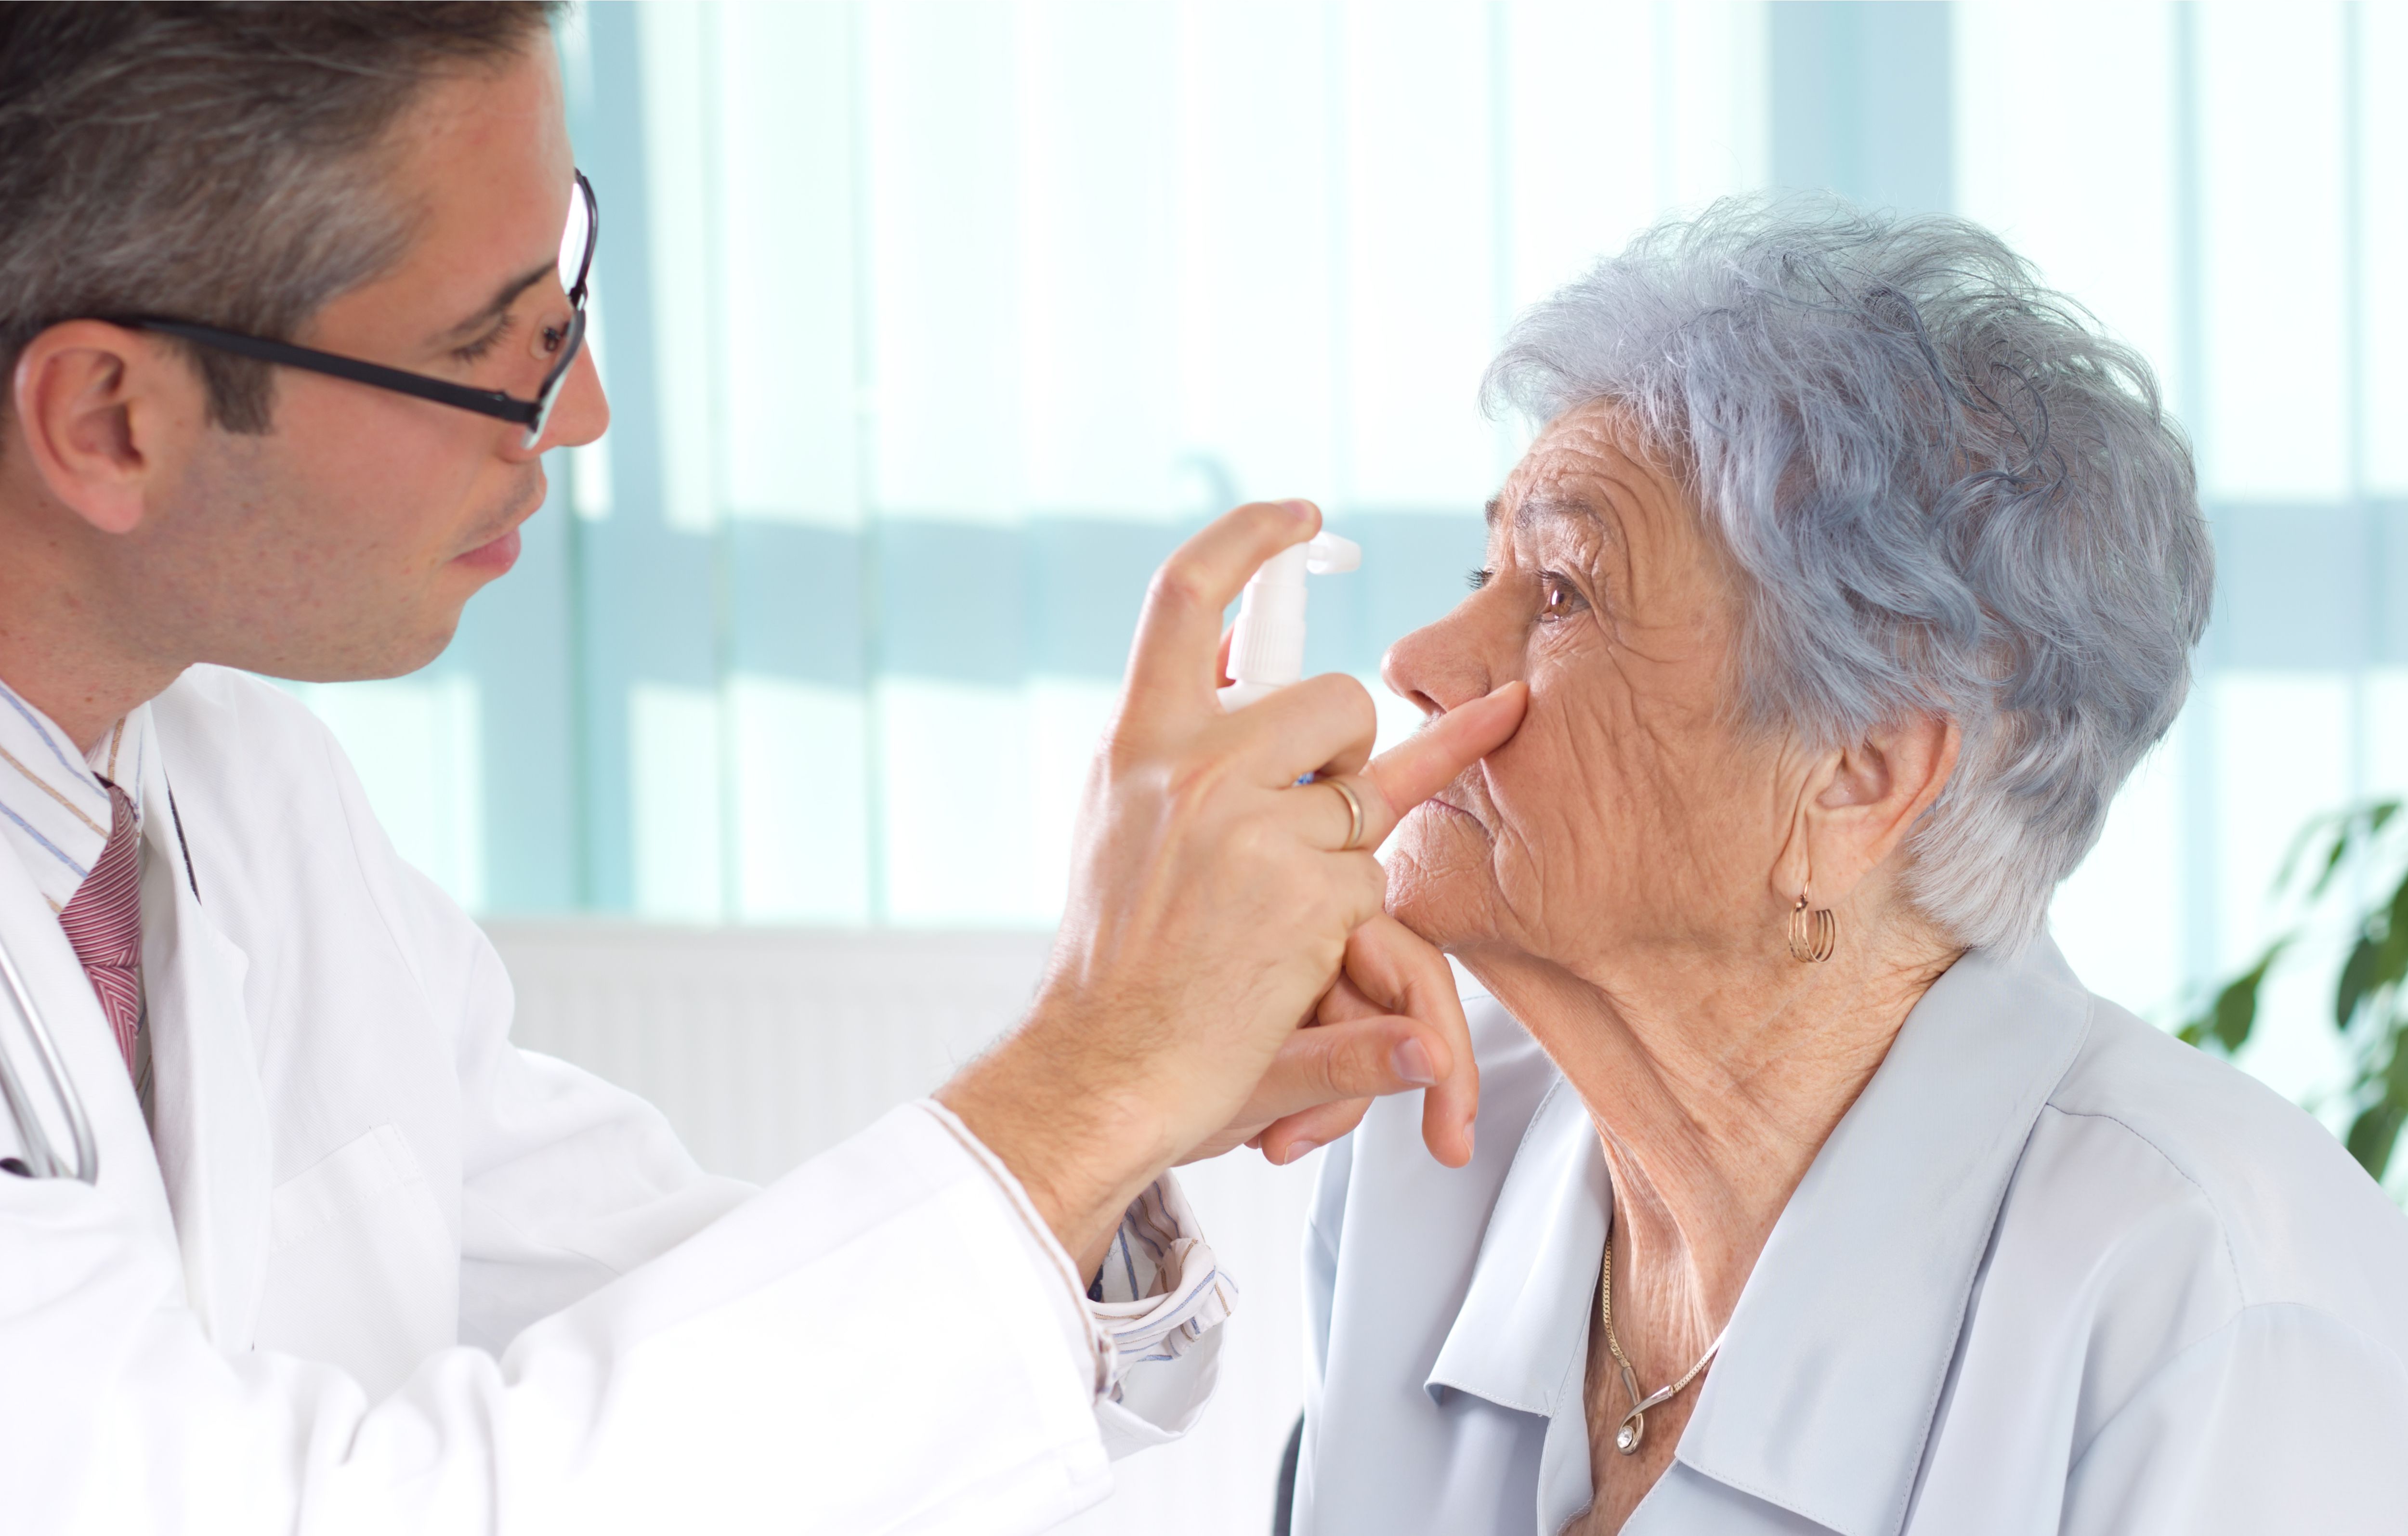 Diagnosis and Care for Glaucoma  